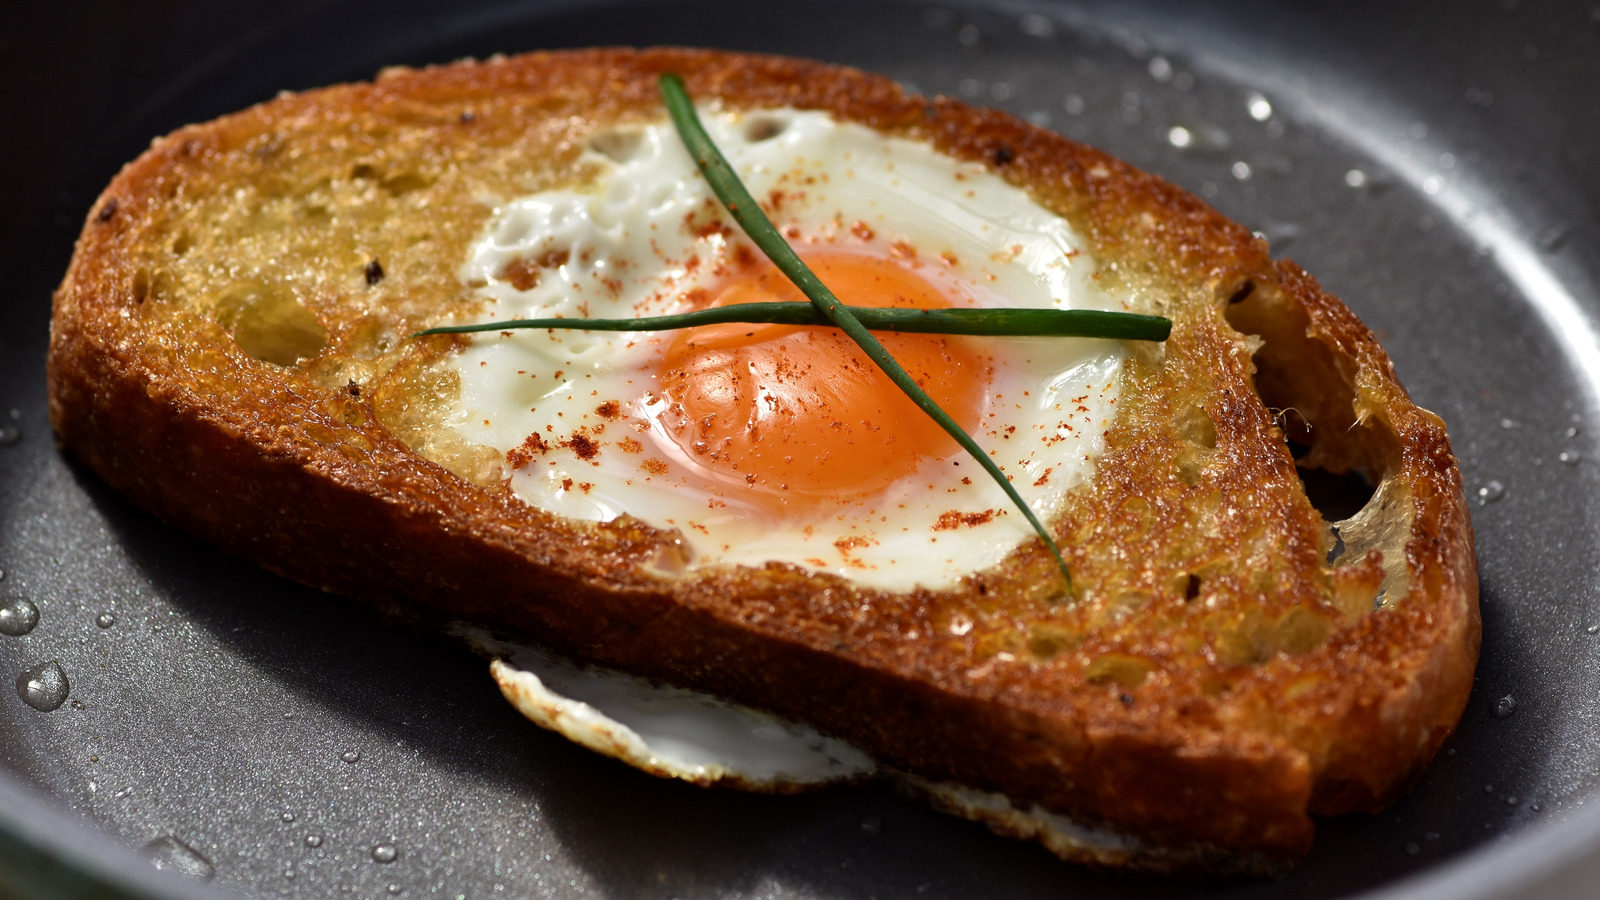 https://www.foodrepublic.com/img/gallery/the-shot-glass-method-for-perfect-egg-in-a-hole-toast/l-intro-1691433185.jpg